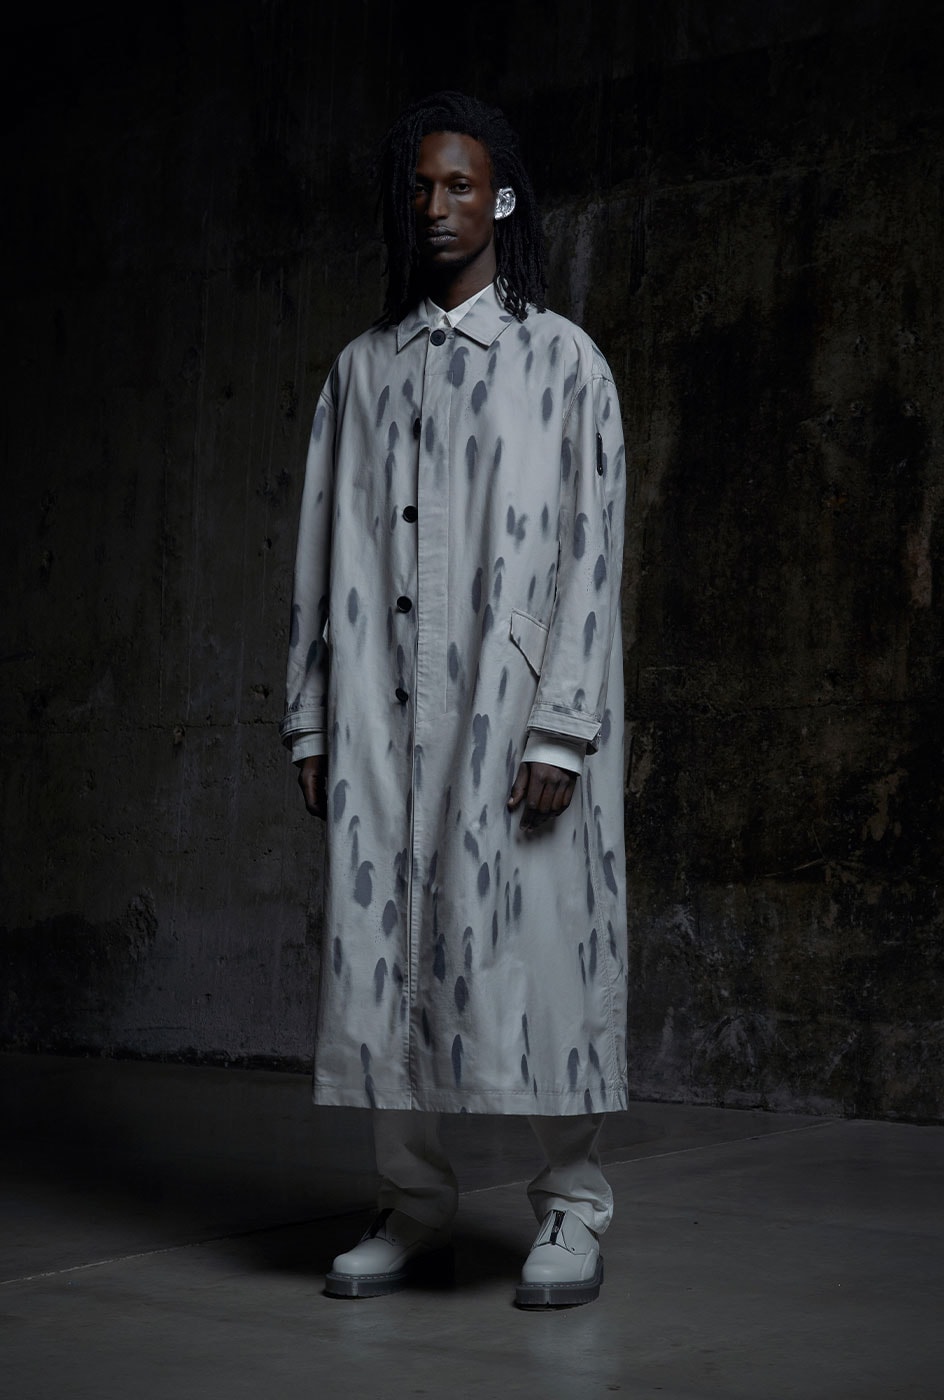 A-COLD-WALL* FW22 Collection Is Ghoulish About External Expressions A-COLD-WALL* Fall/Winter 2022 Collection Lookbook 21st century shadow emotional 